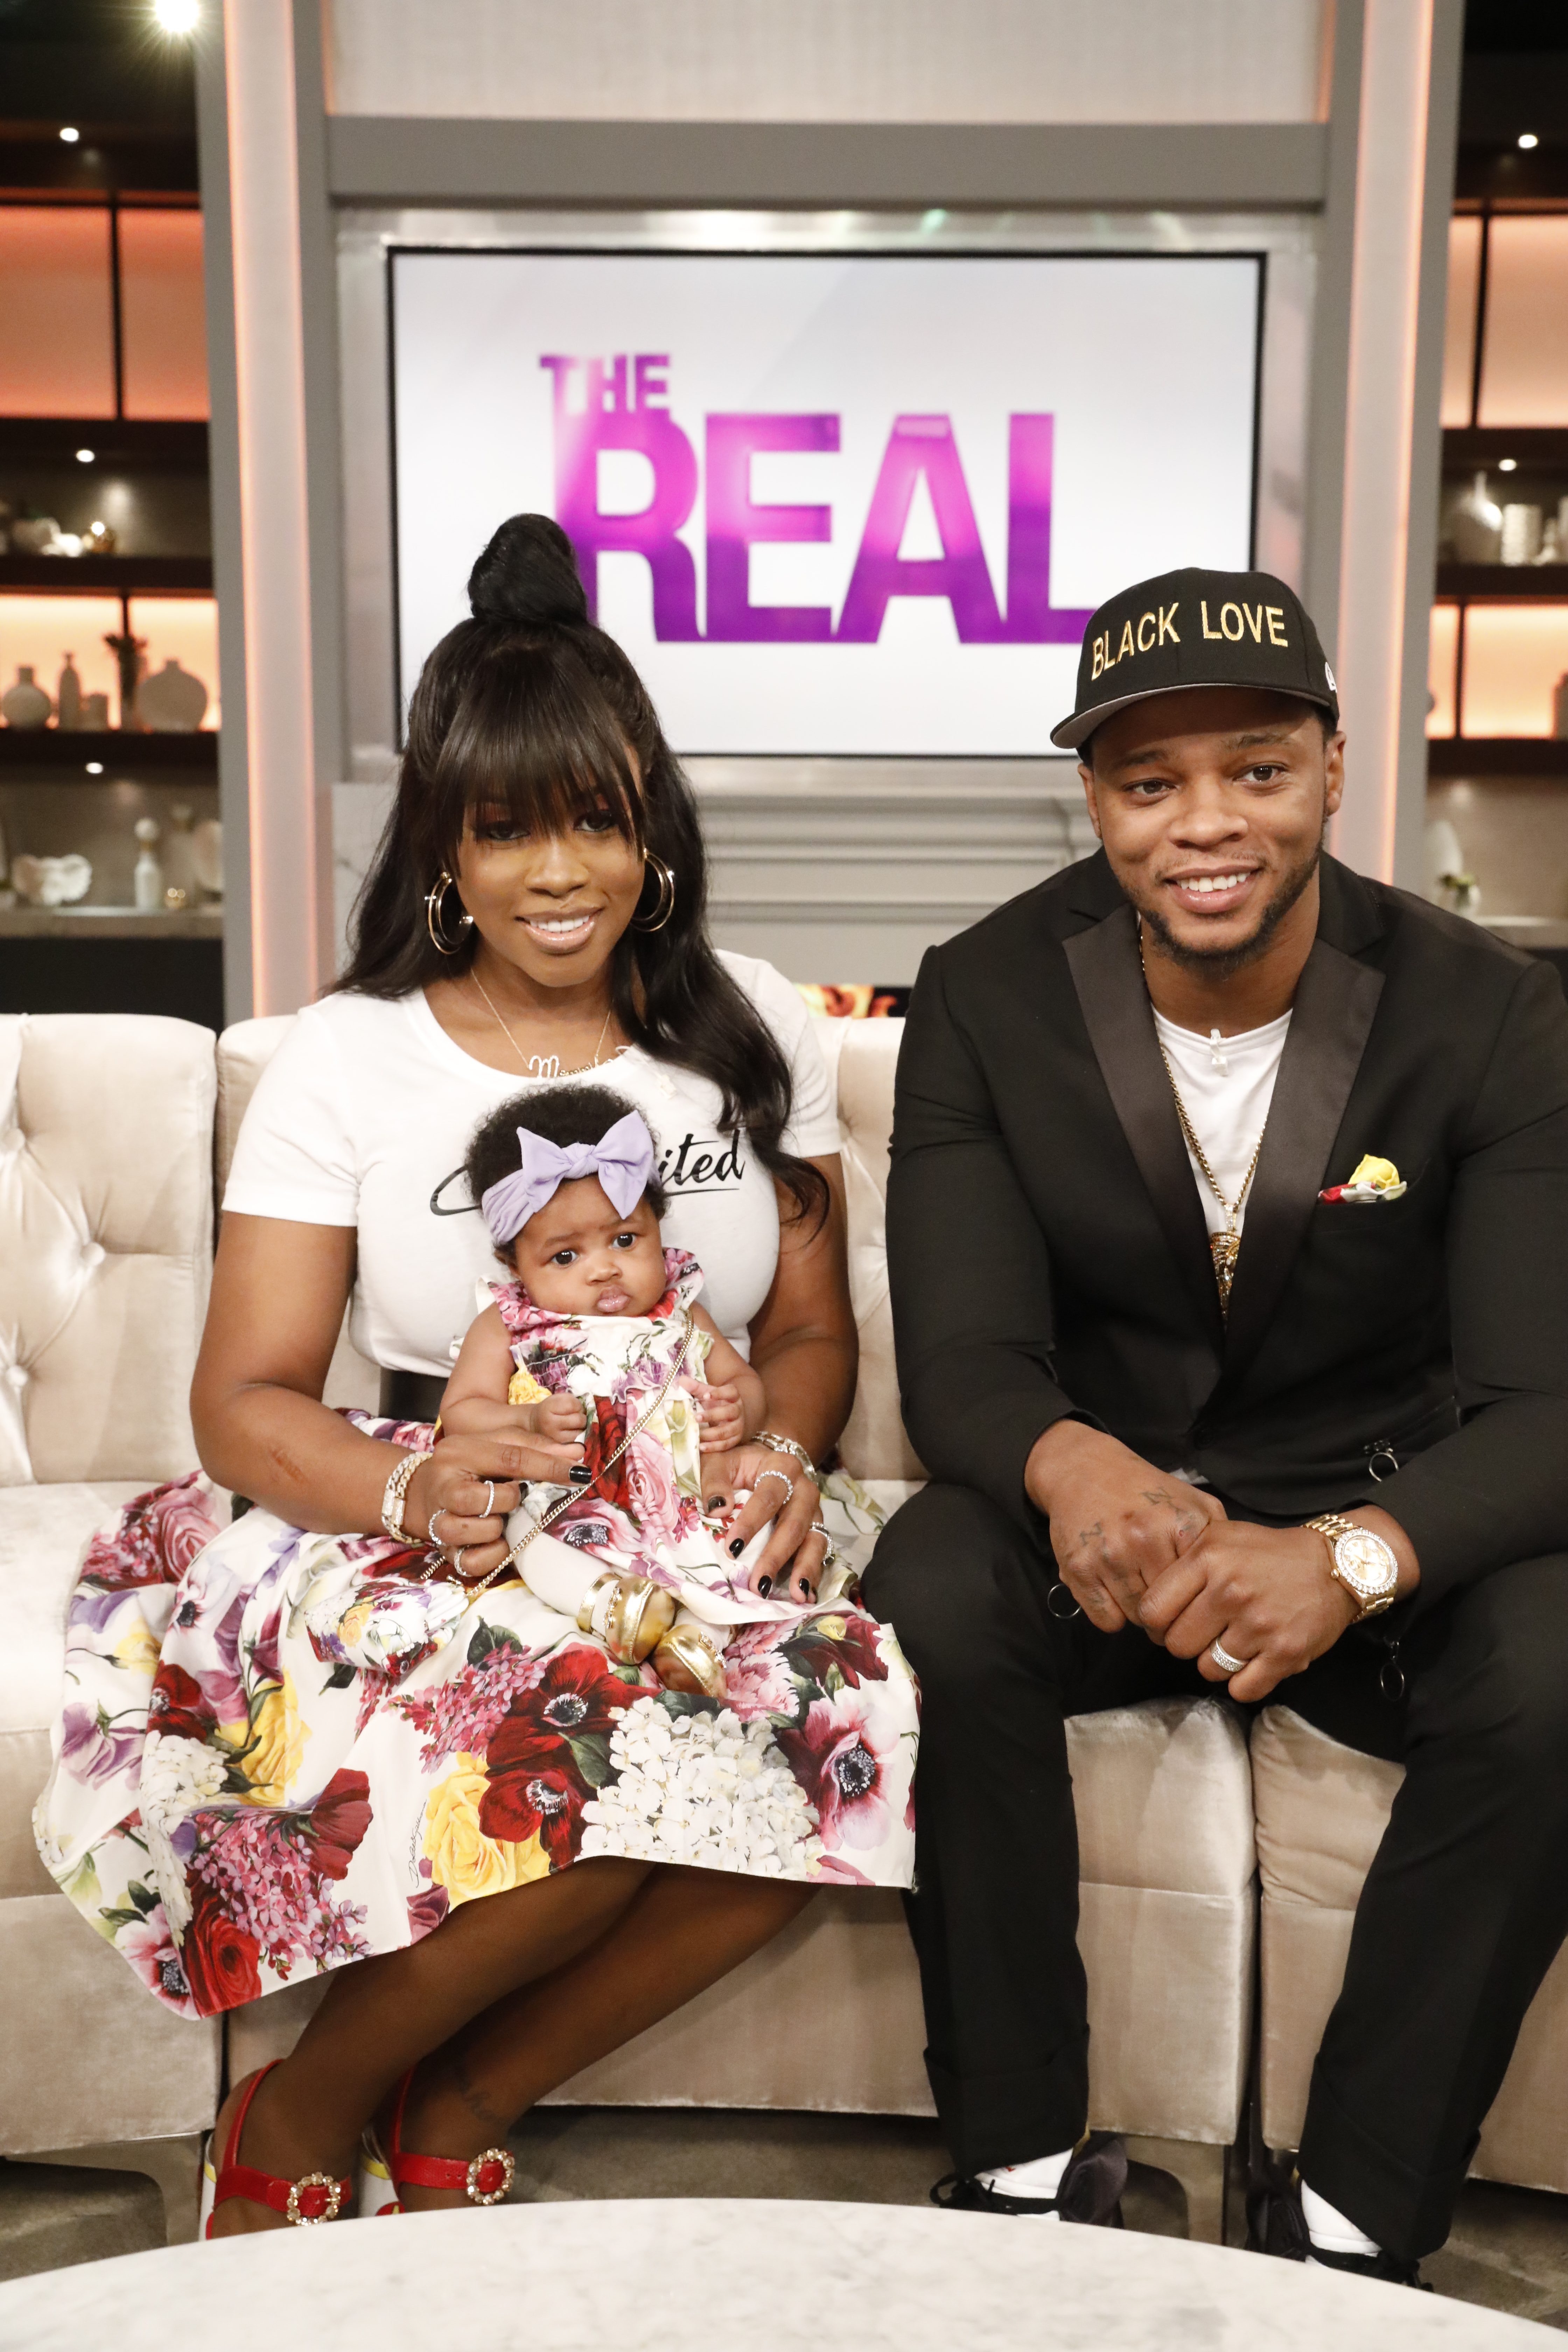 In Case You Missed It: Rapper Remy Ma & Papoose On The Real